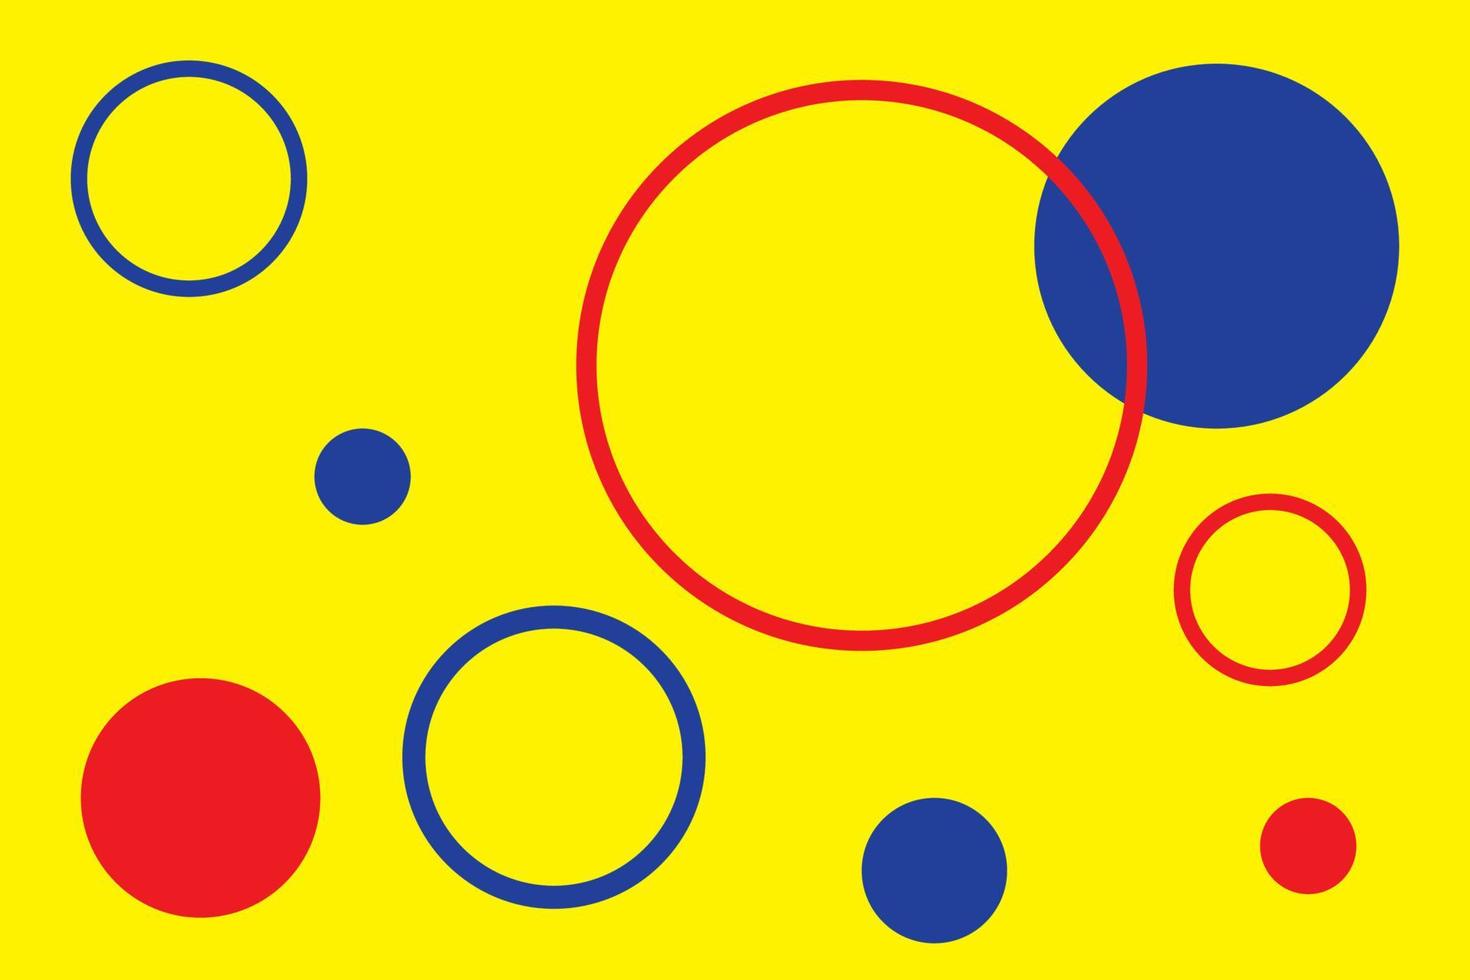 Primary colors background, blue, red, and yellow with geometric shape. Vector illustration